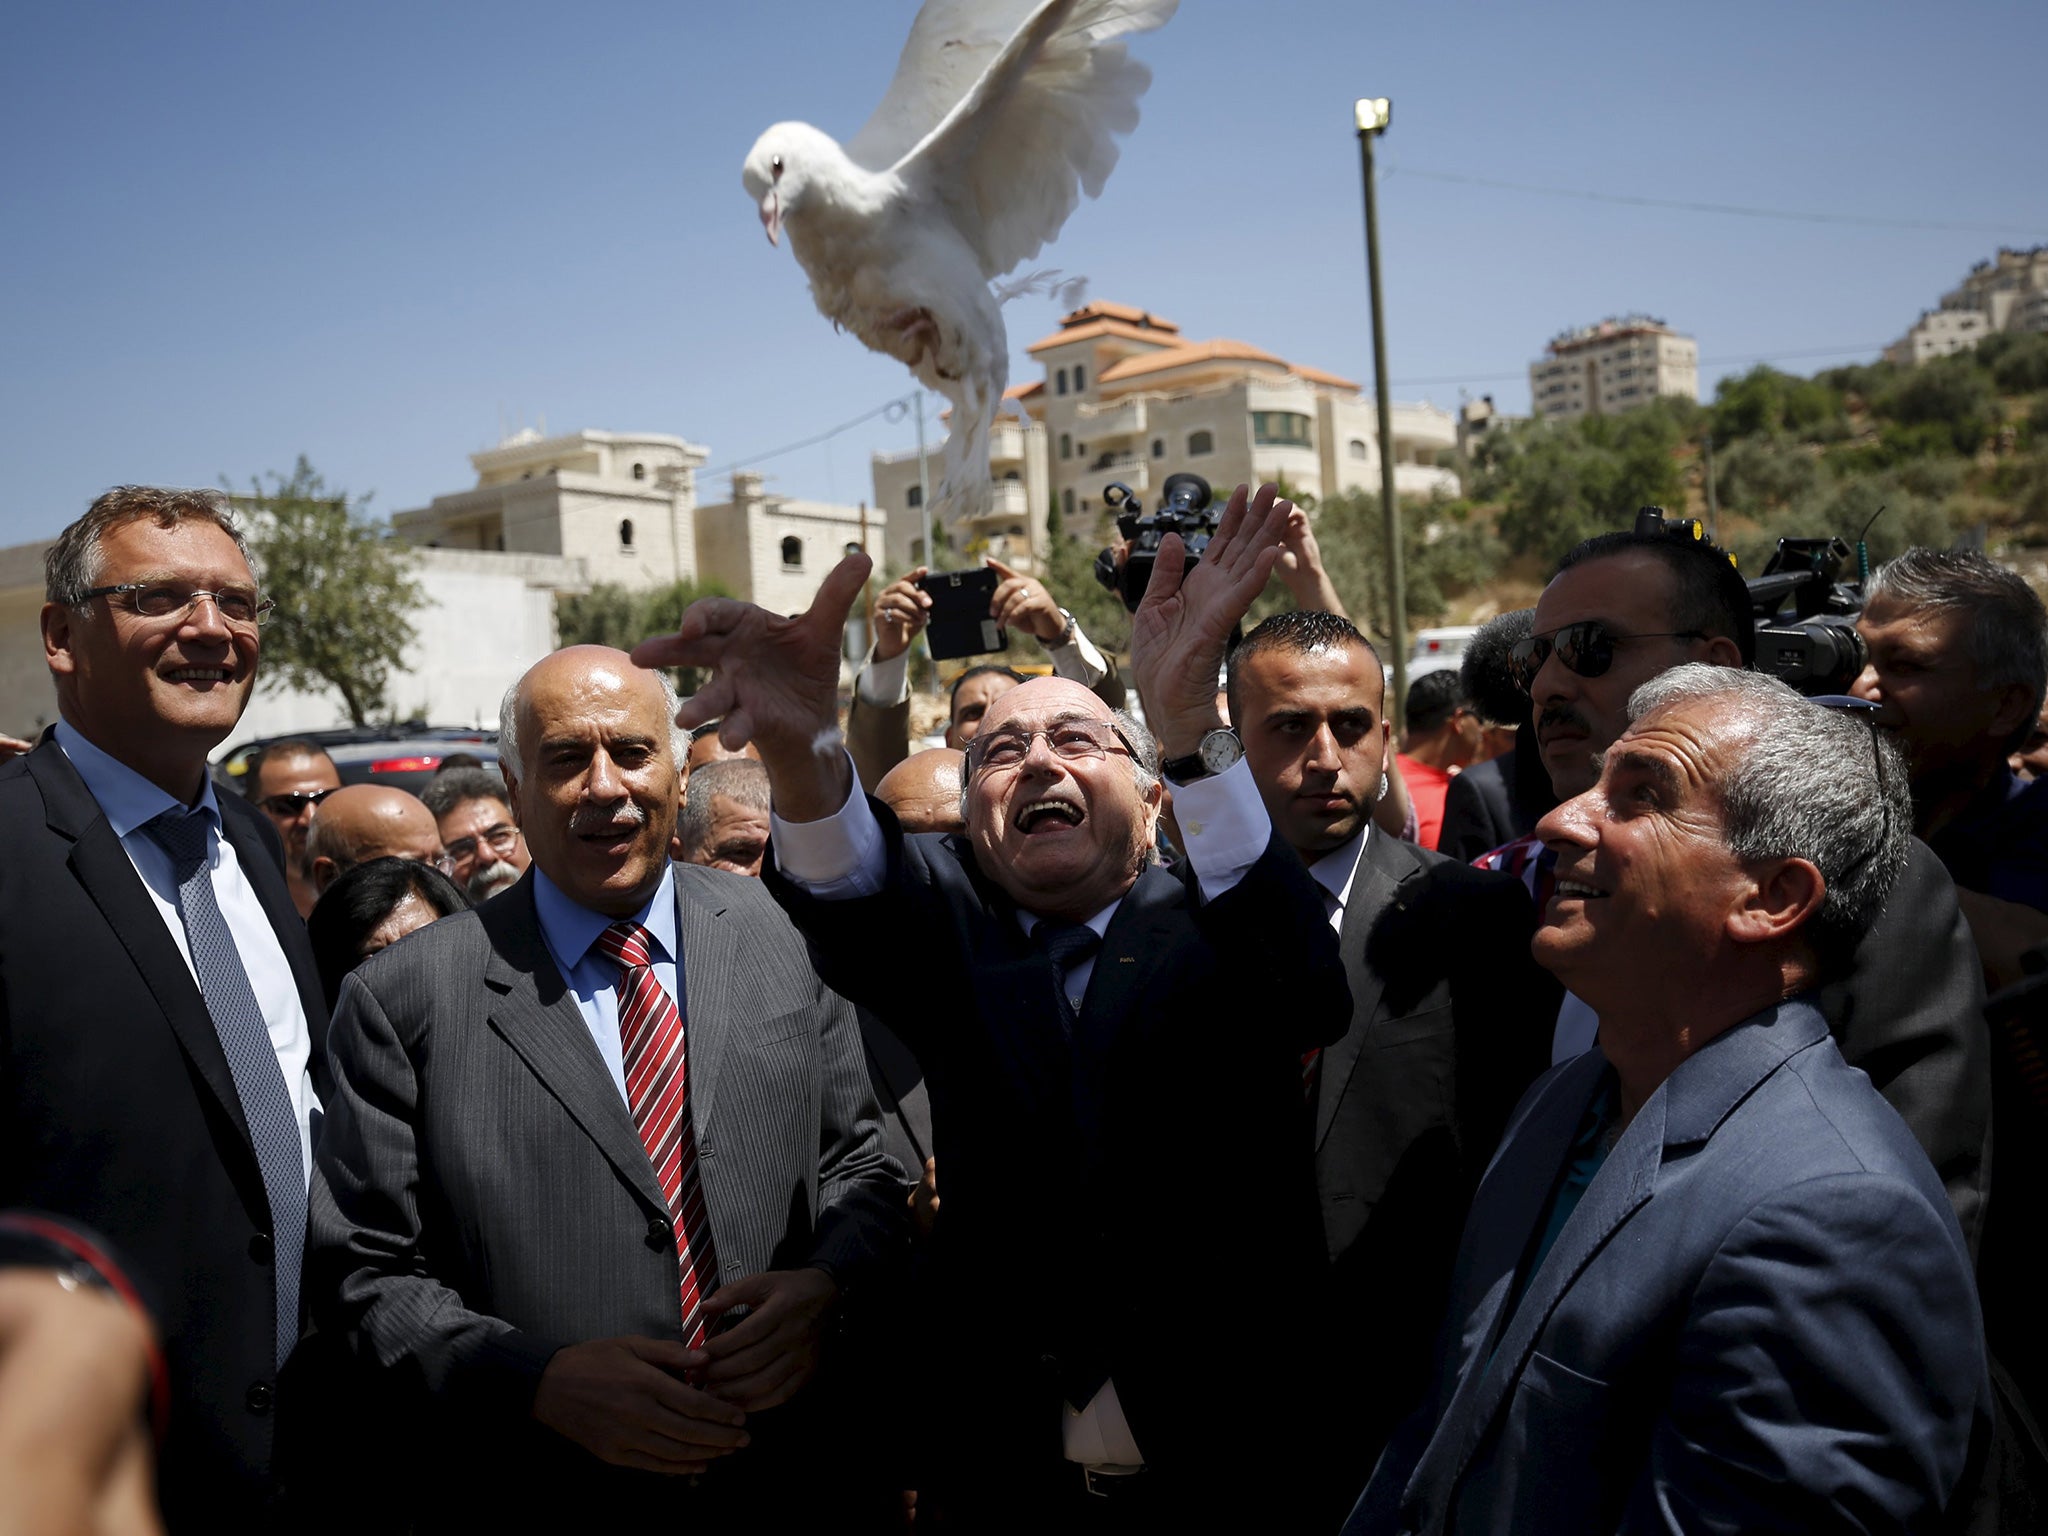 The Fifa president, Sepp Blatter, who says he is on a ‘peace mission’, releases a dove during his visit to Dura al-Qar’ village in the West Bank city of Ramallah